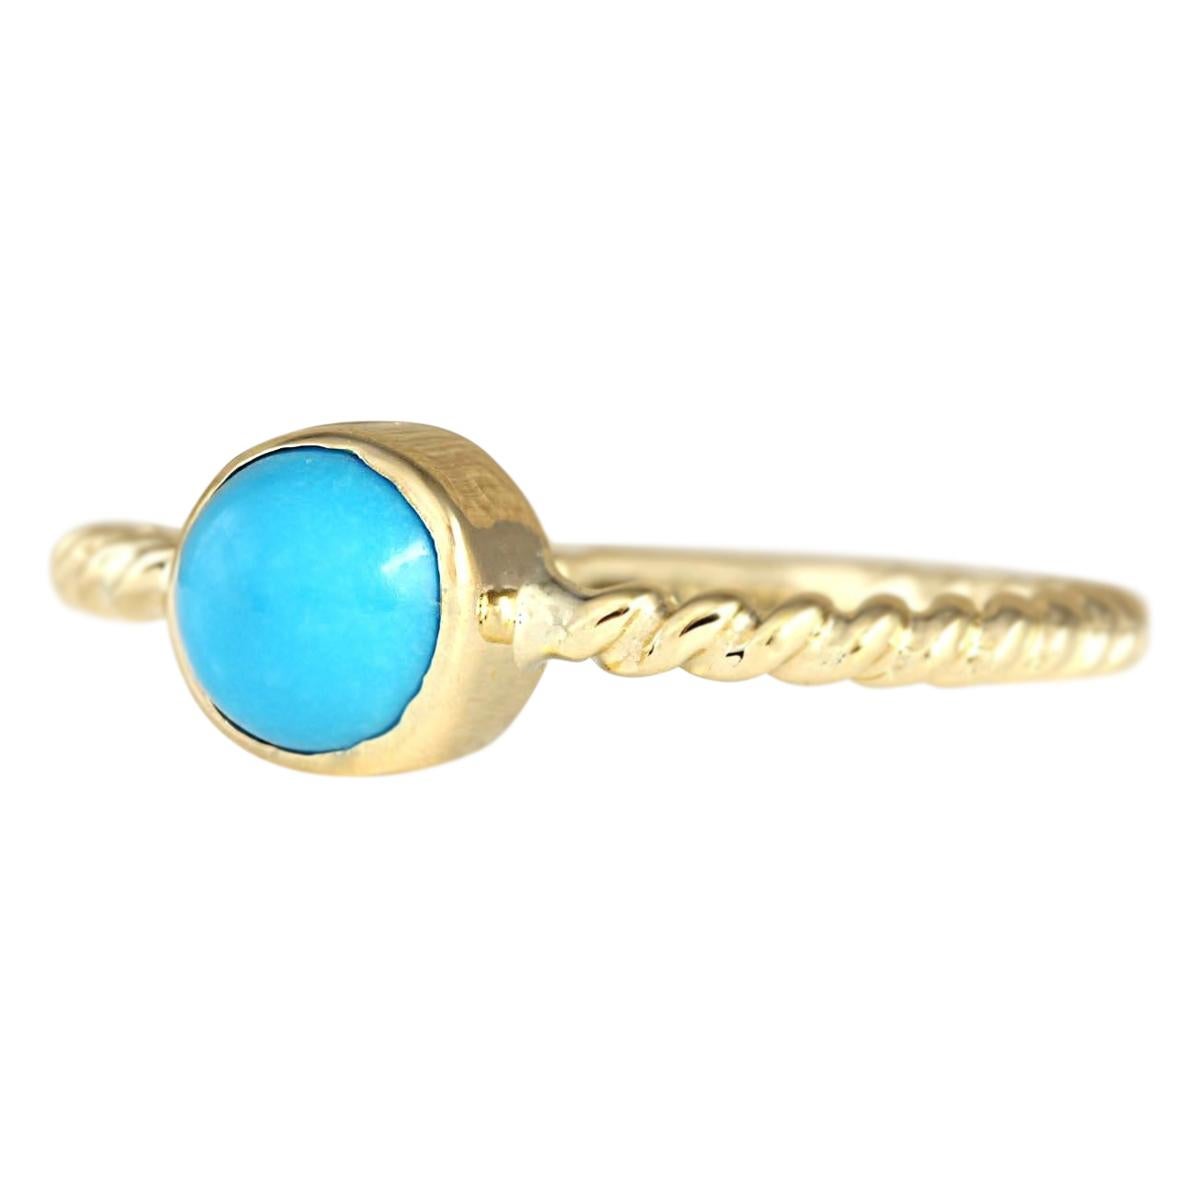 Stamped: 14K Yellow Gold
Total Ring Weight: 2.2 Grams
Total Natural Turquoise Weight is 1.00 Carat
Color: Blue
Face Measures: 6.00x6.00 mm
Sku: [703231W]